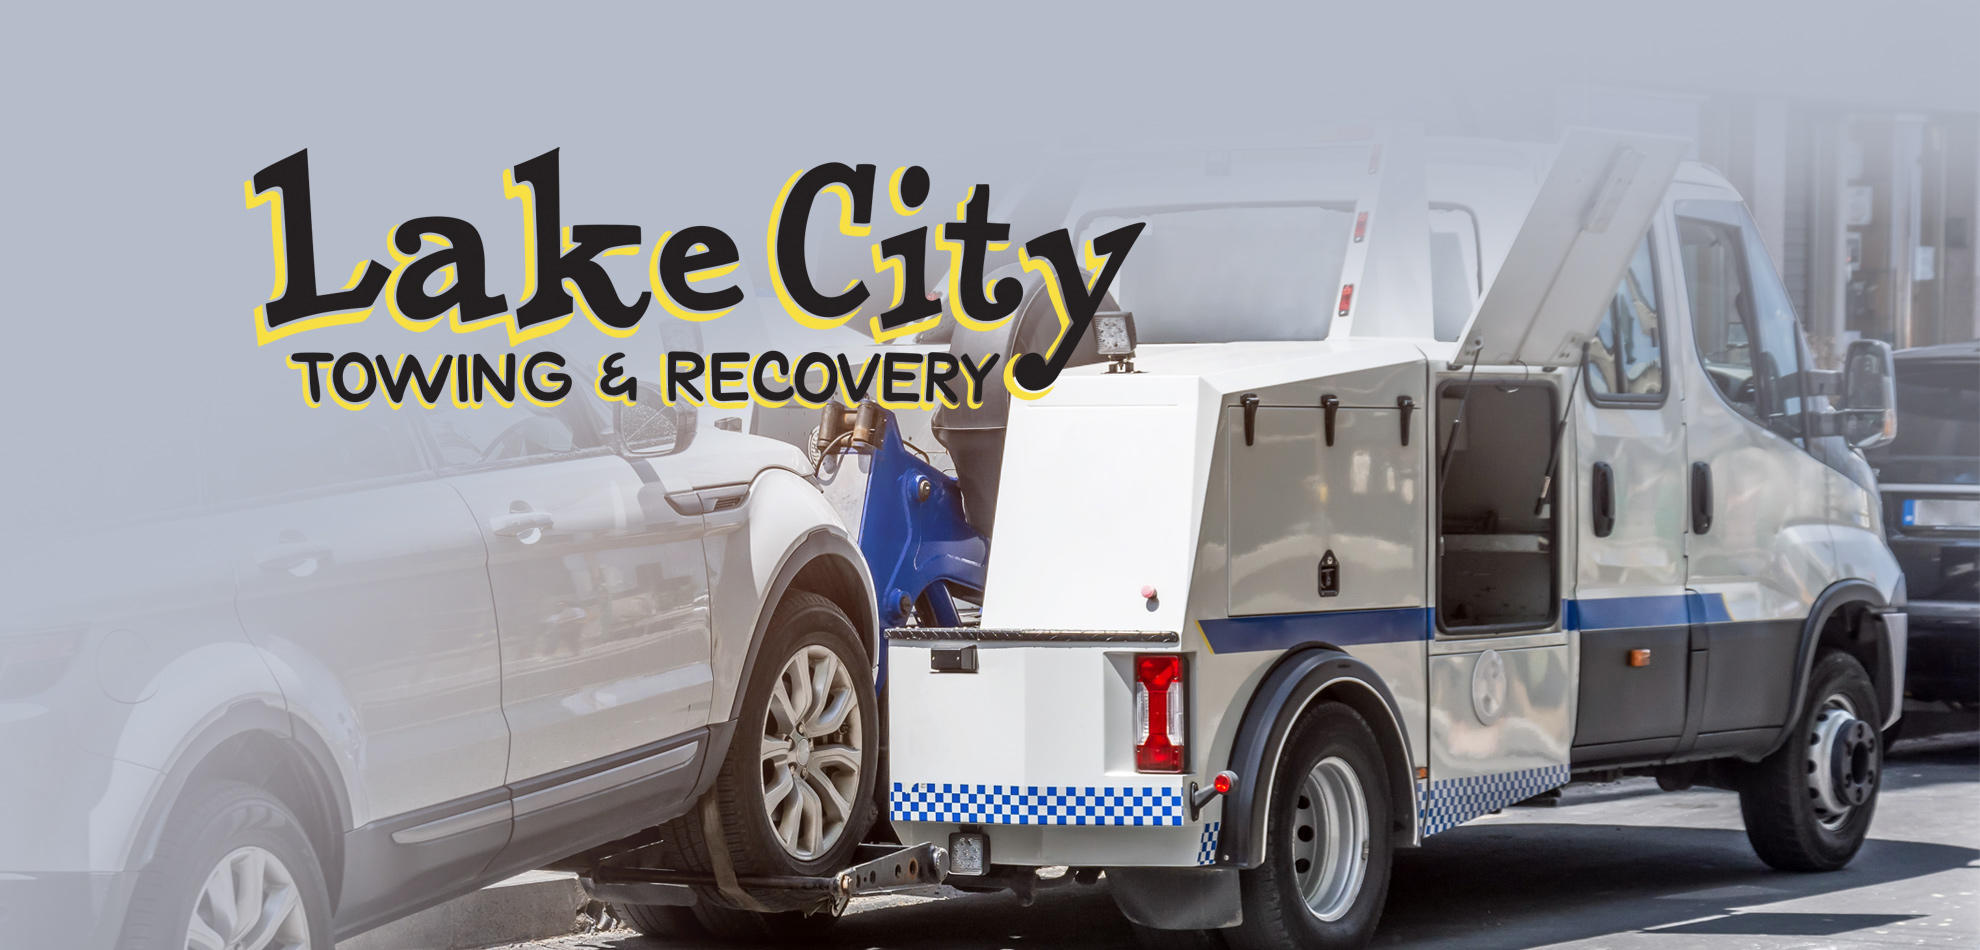 Lake City Towing & Recovery